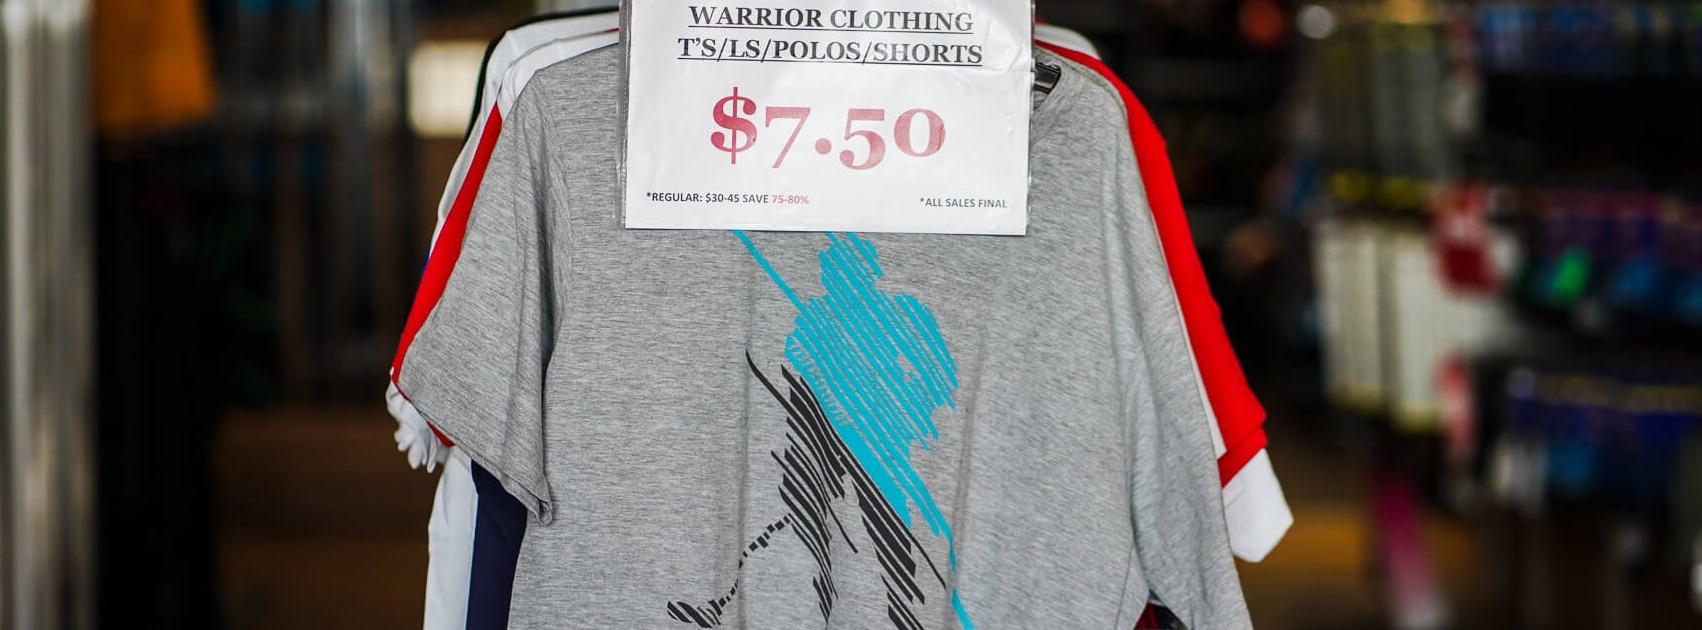 Warrior Clothing Clearance  | Save 75% | $7.50 T-Shirts